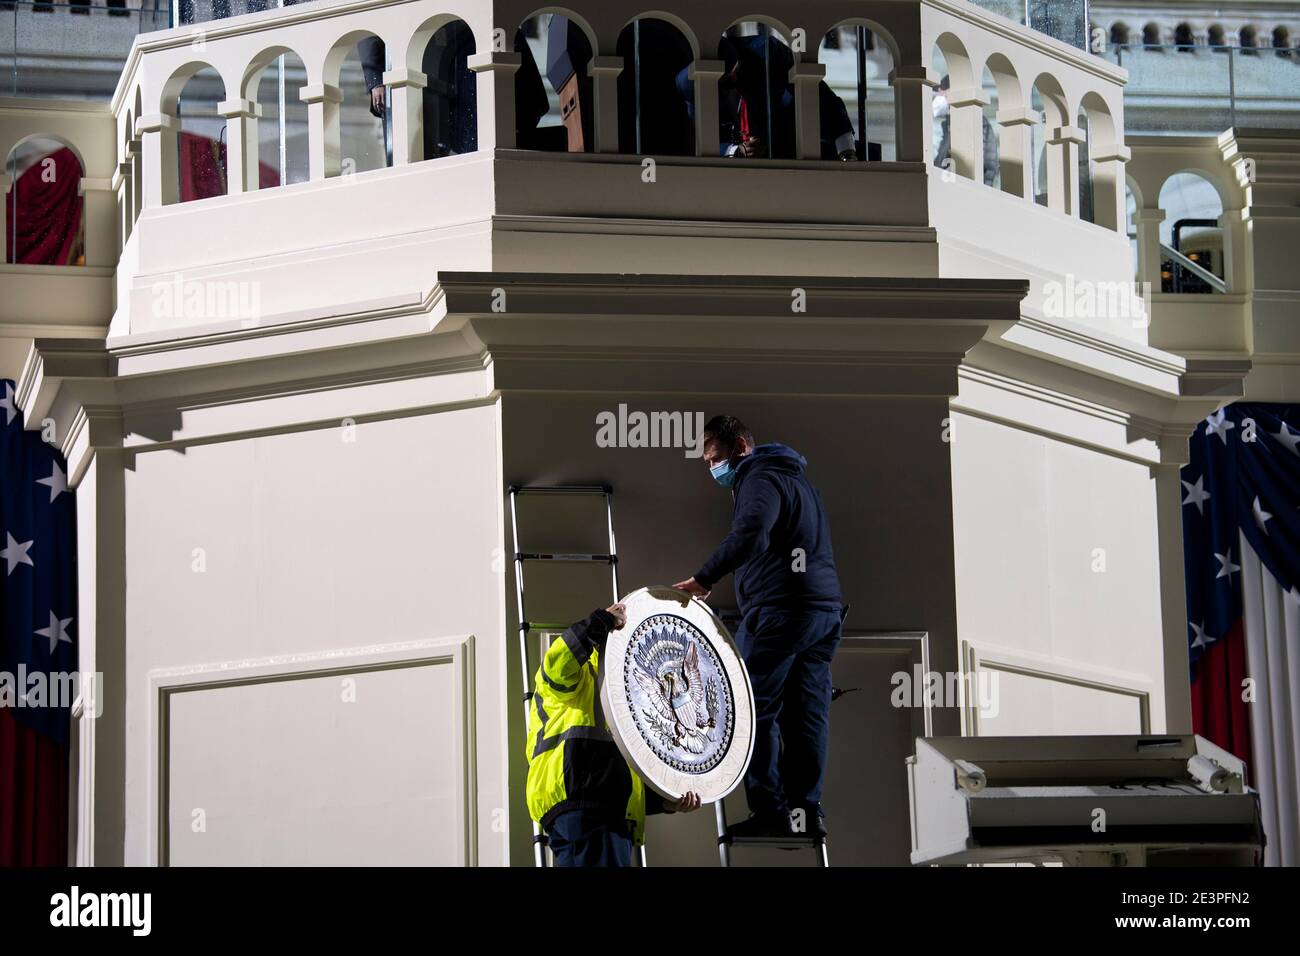 UNITED STATES - January 20: Architect of the Capitol workers hang up a Presidential seal as preparations are made prior to the 59th inaugural ceremony for President-elect Joe Biden and Vice President-elect Kamala Harris on the West Front of the U.S. Capitol in Washington on Wednesday, Jan. 20, 2021. Credit: Caroline Brehman / Pool via CNP | usage worldwide Stock Photo